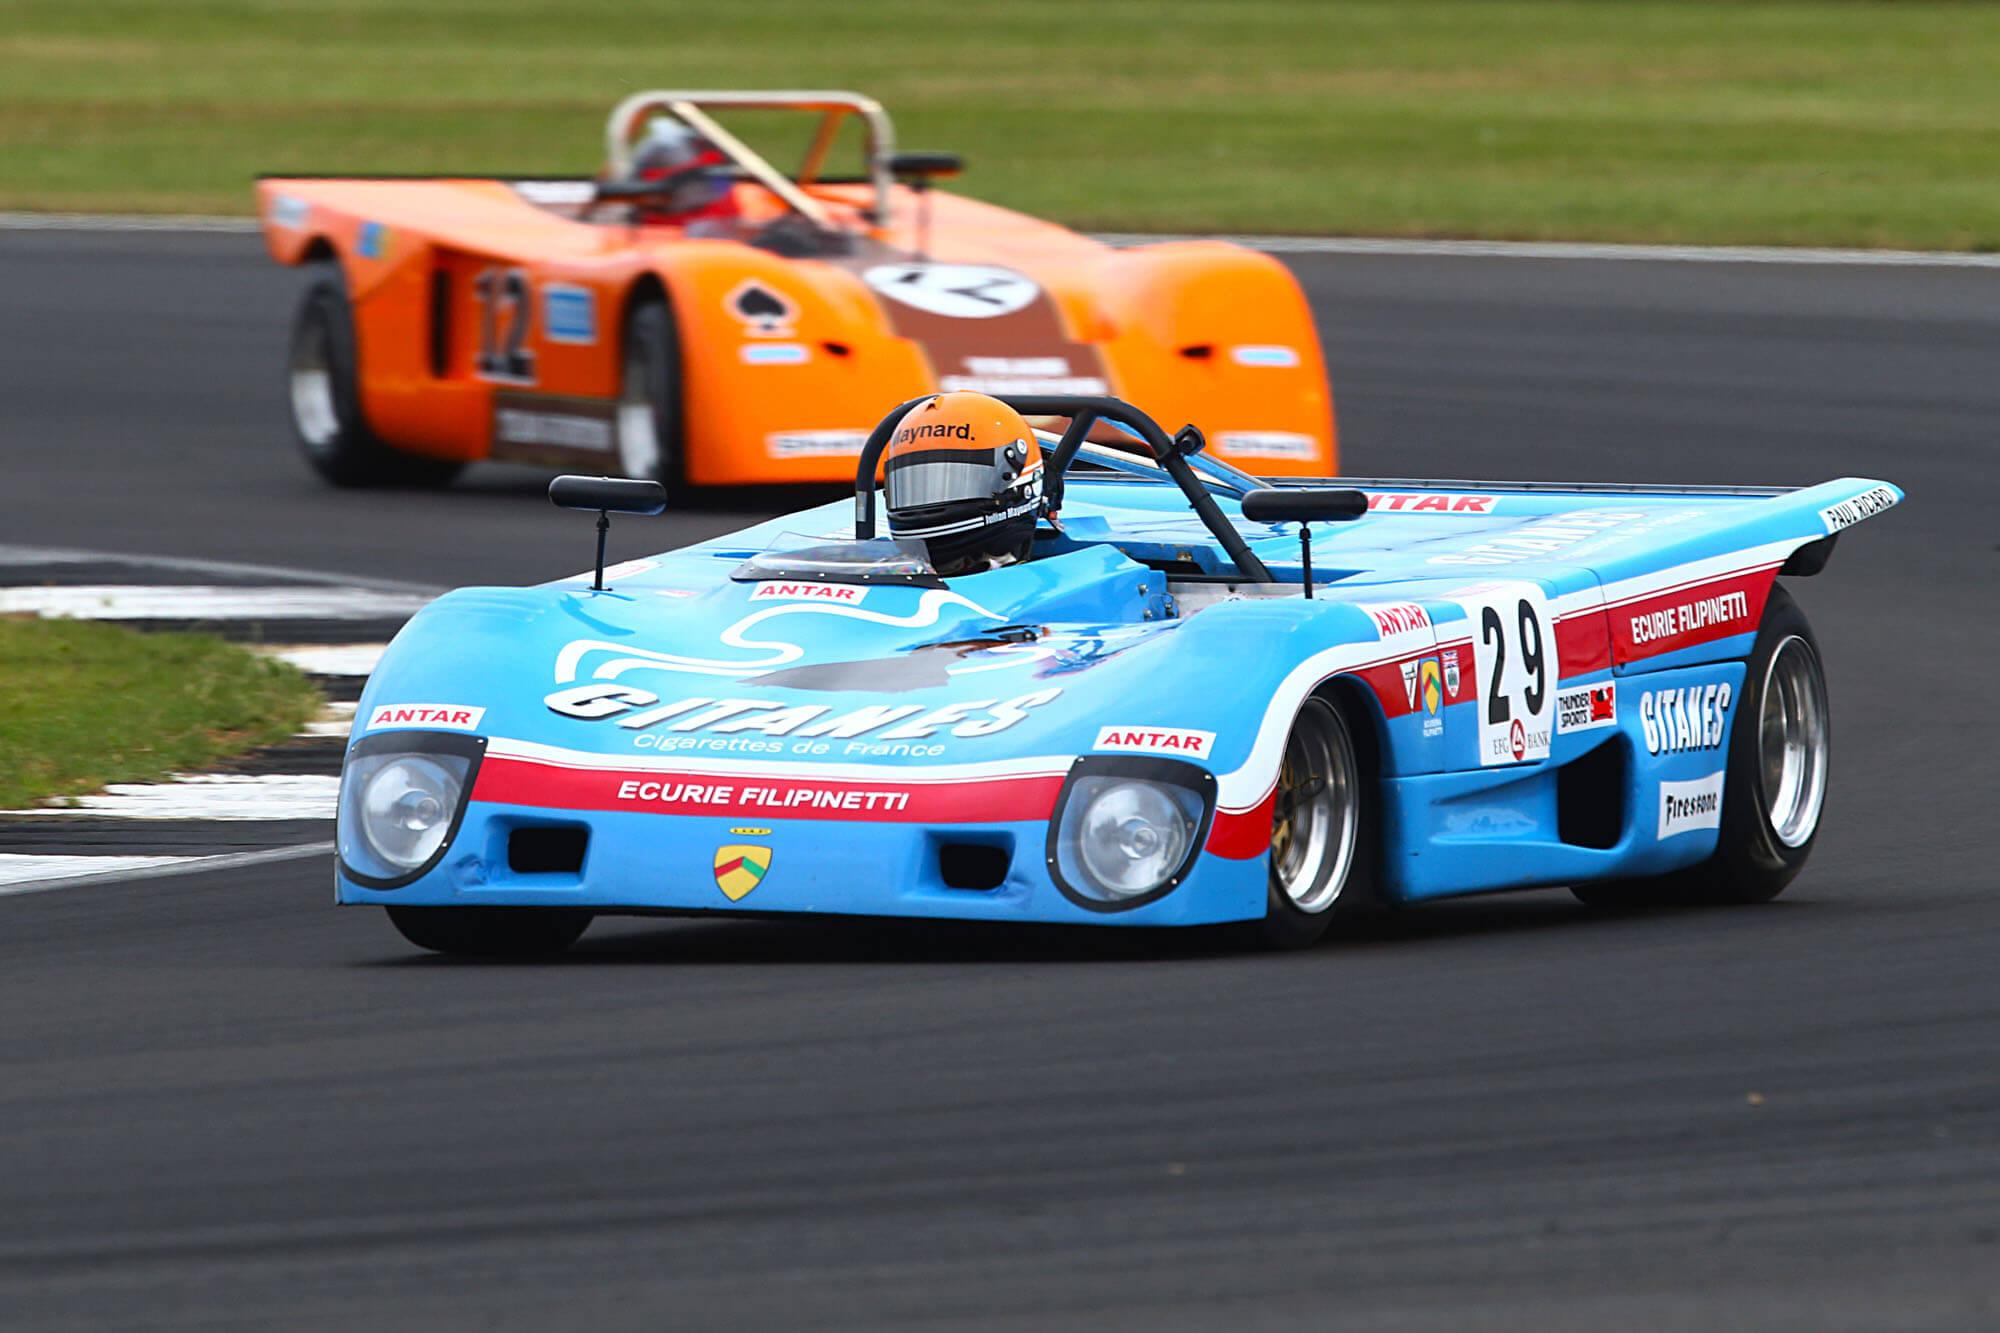 Two classic cars racing round a corner in the HSCC Thundersports grid at The Classic at Silverstone